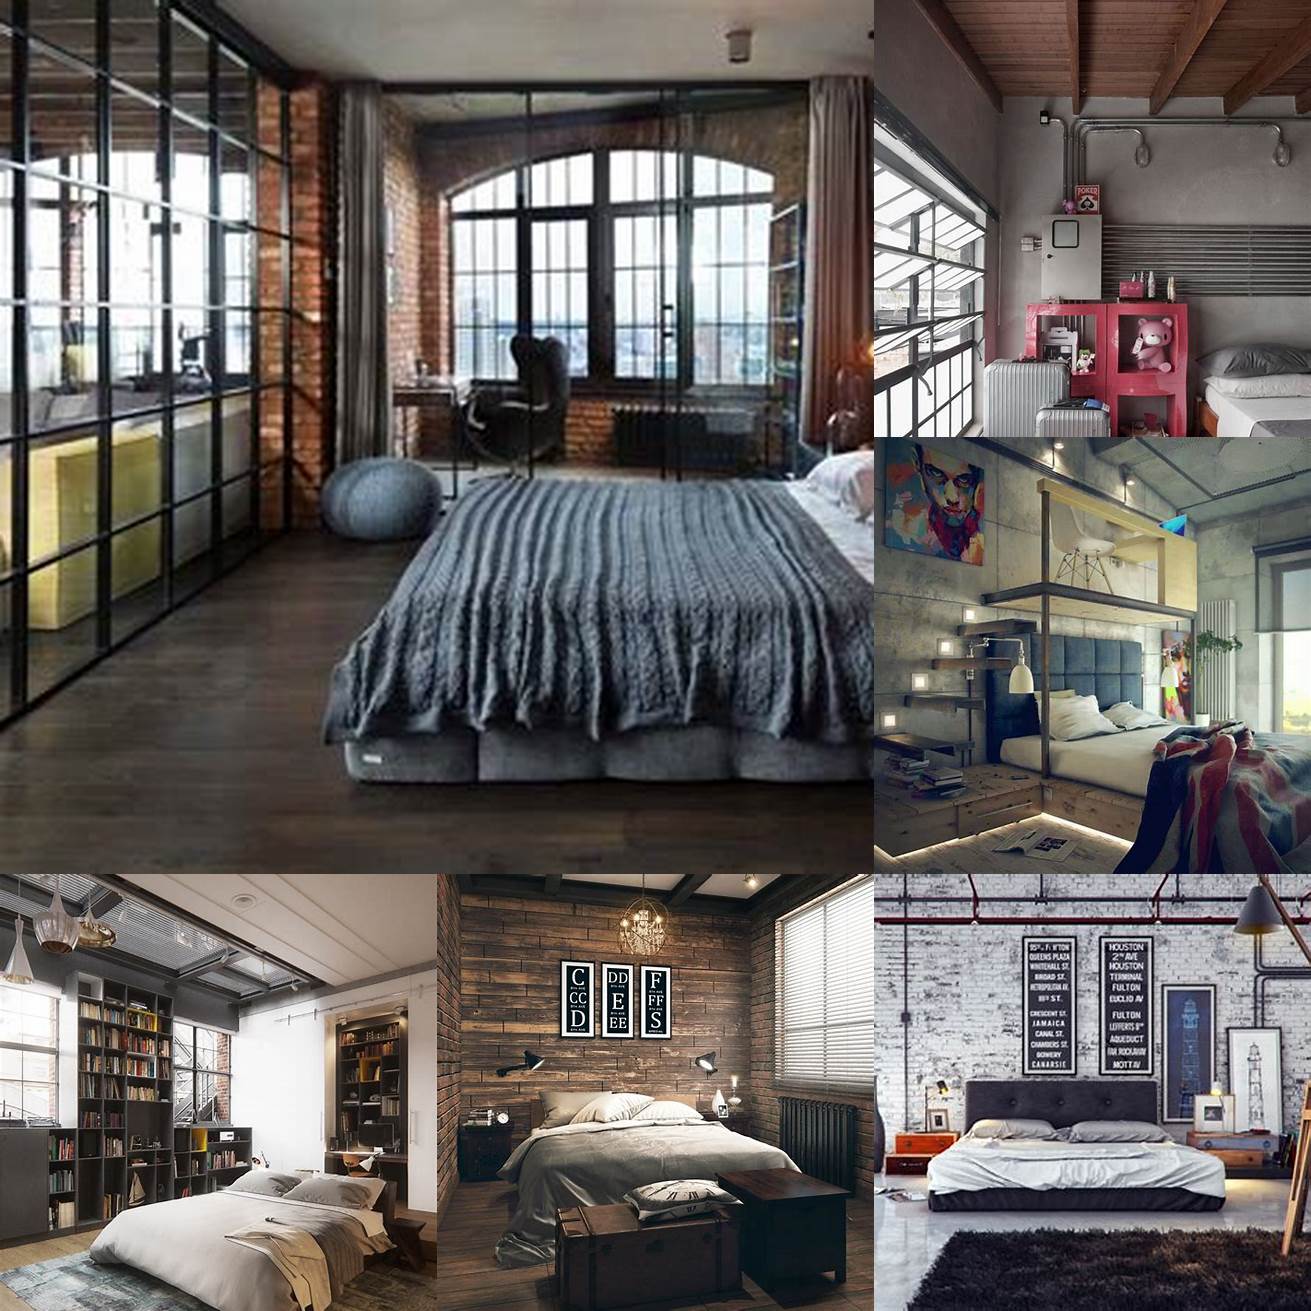 An industrial bedroom is perfect for those who love the raw and edgy look of factories and warehouses The exposed brick walls and metal pipes create a rugged and masculine atmosphere that is perfect for a bachelor pad